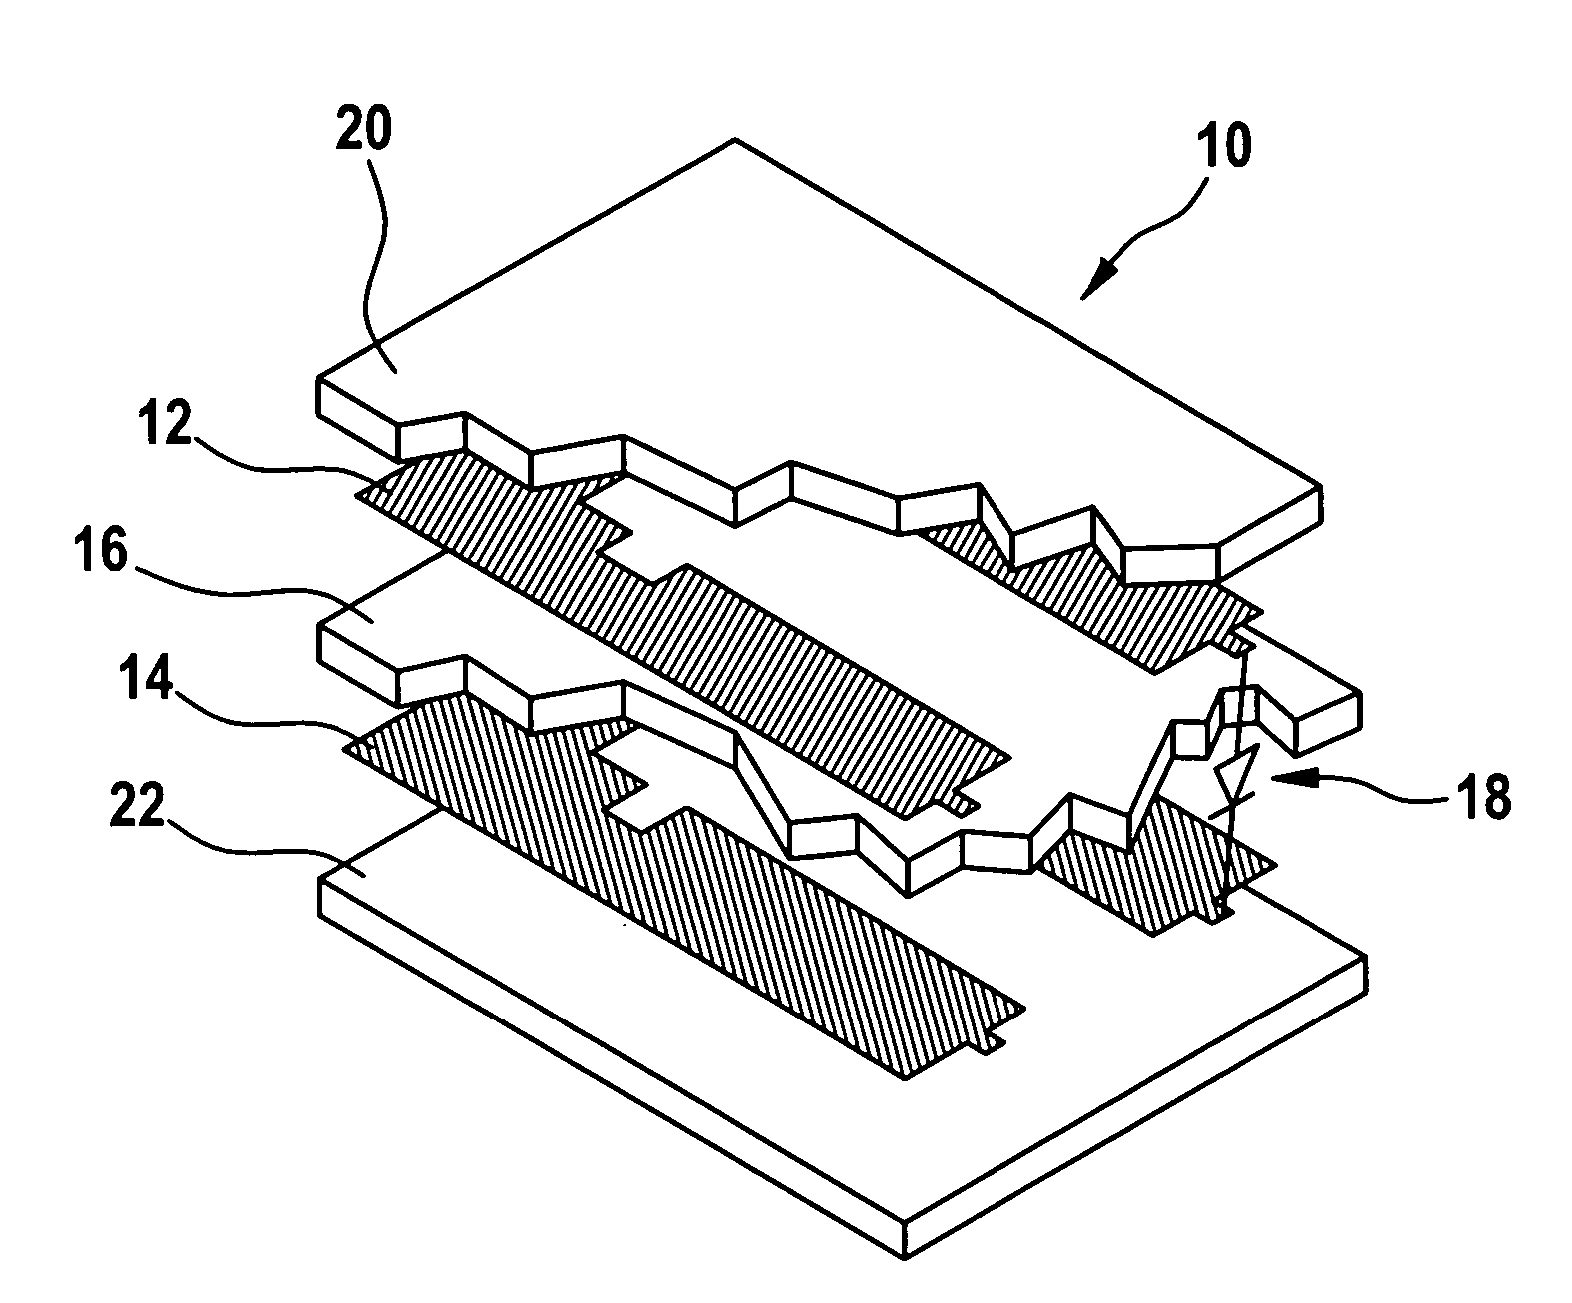 System for capacitive detection of a seat occupancy